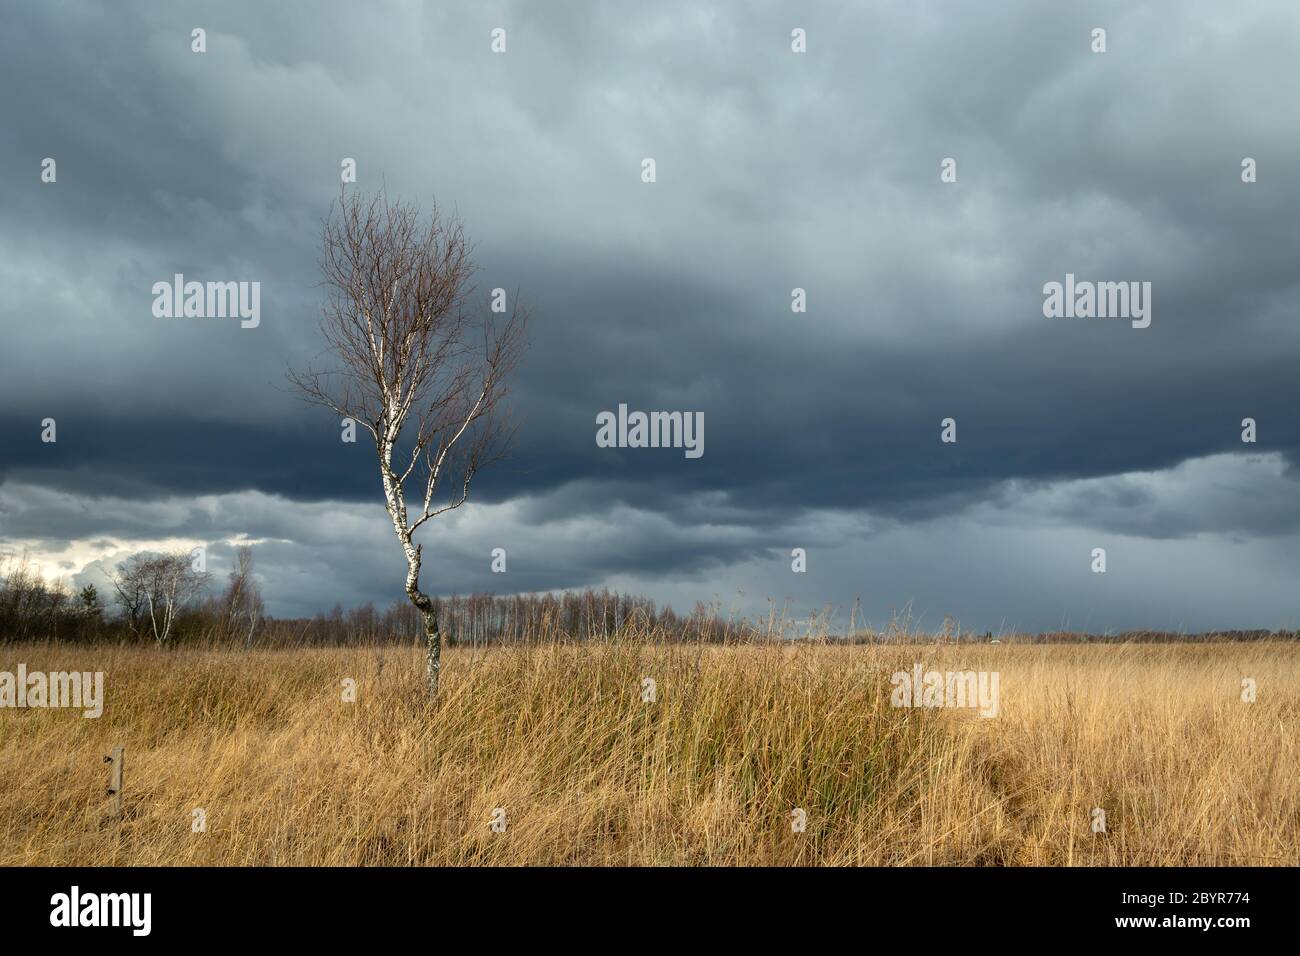 Single birch tree growing in dry grasses, storm clouds on the sky Stock Photo